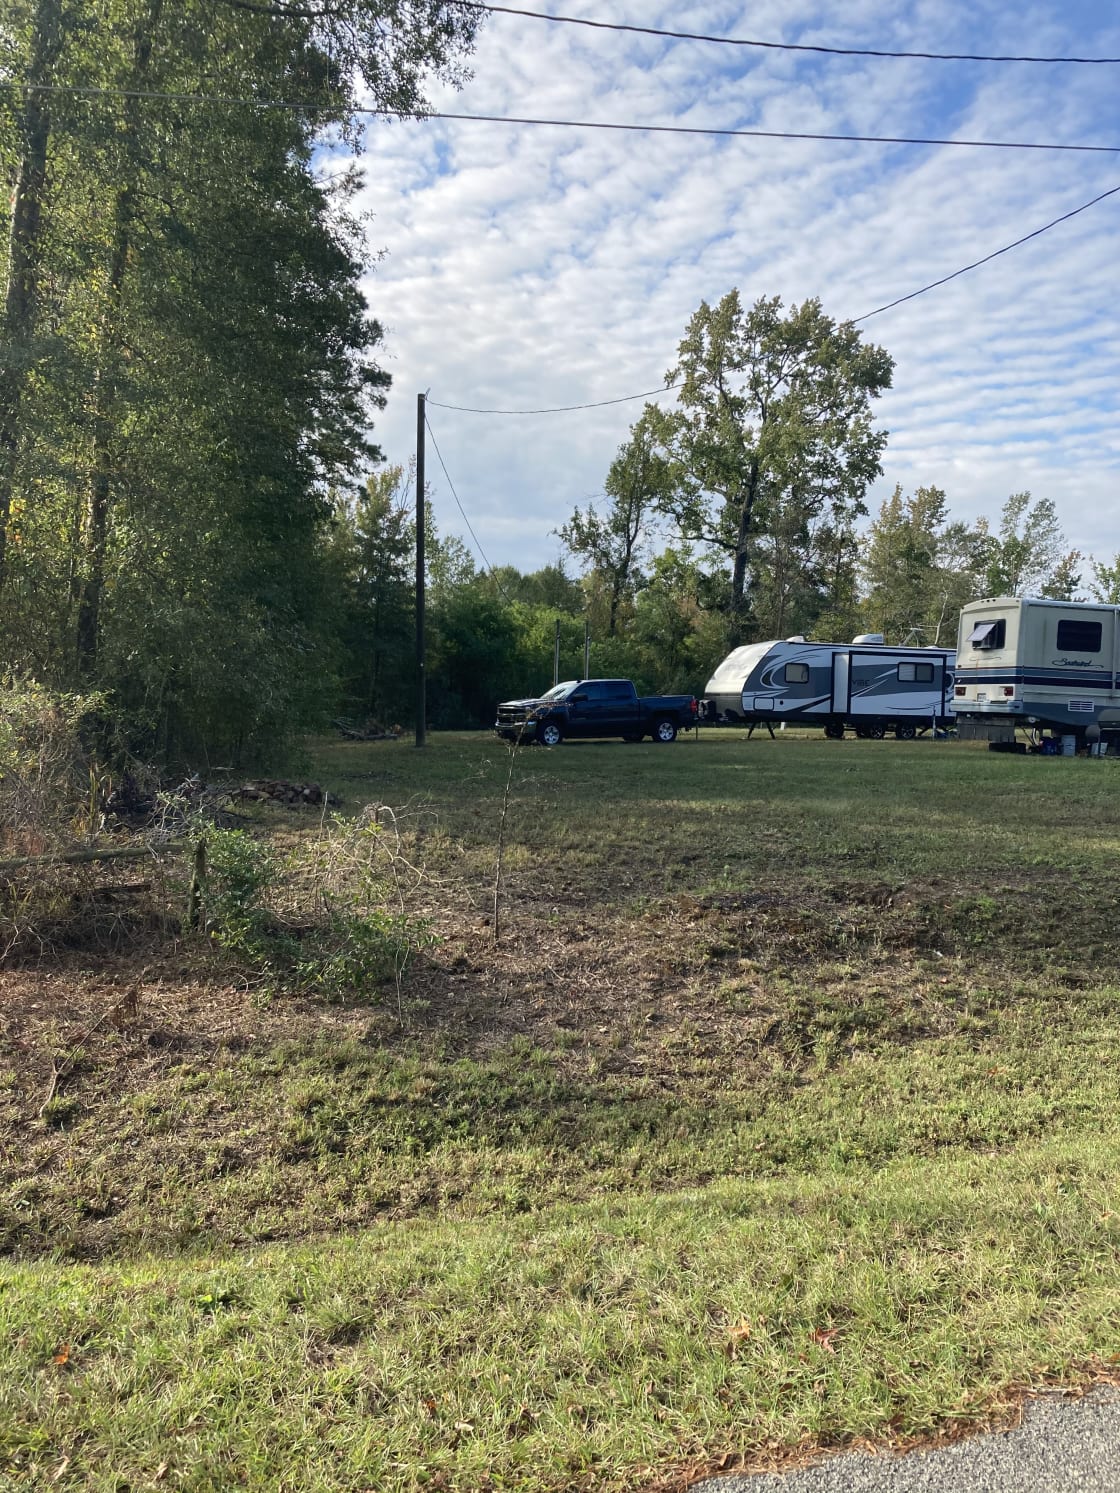 RV  park and tent camps